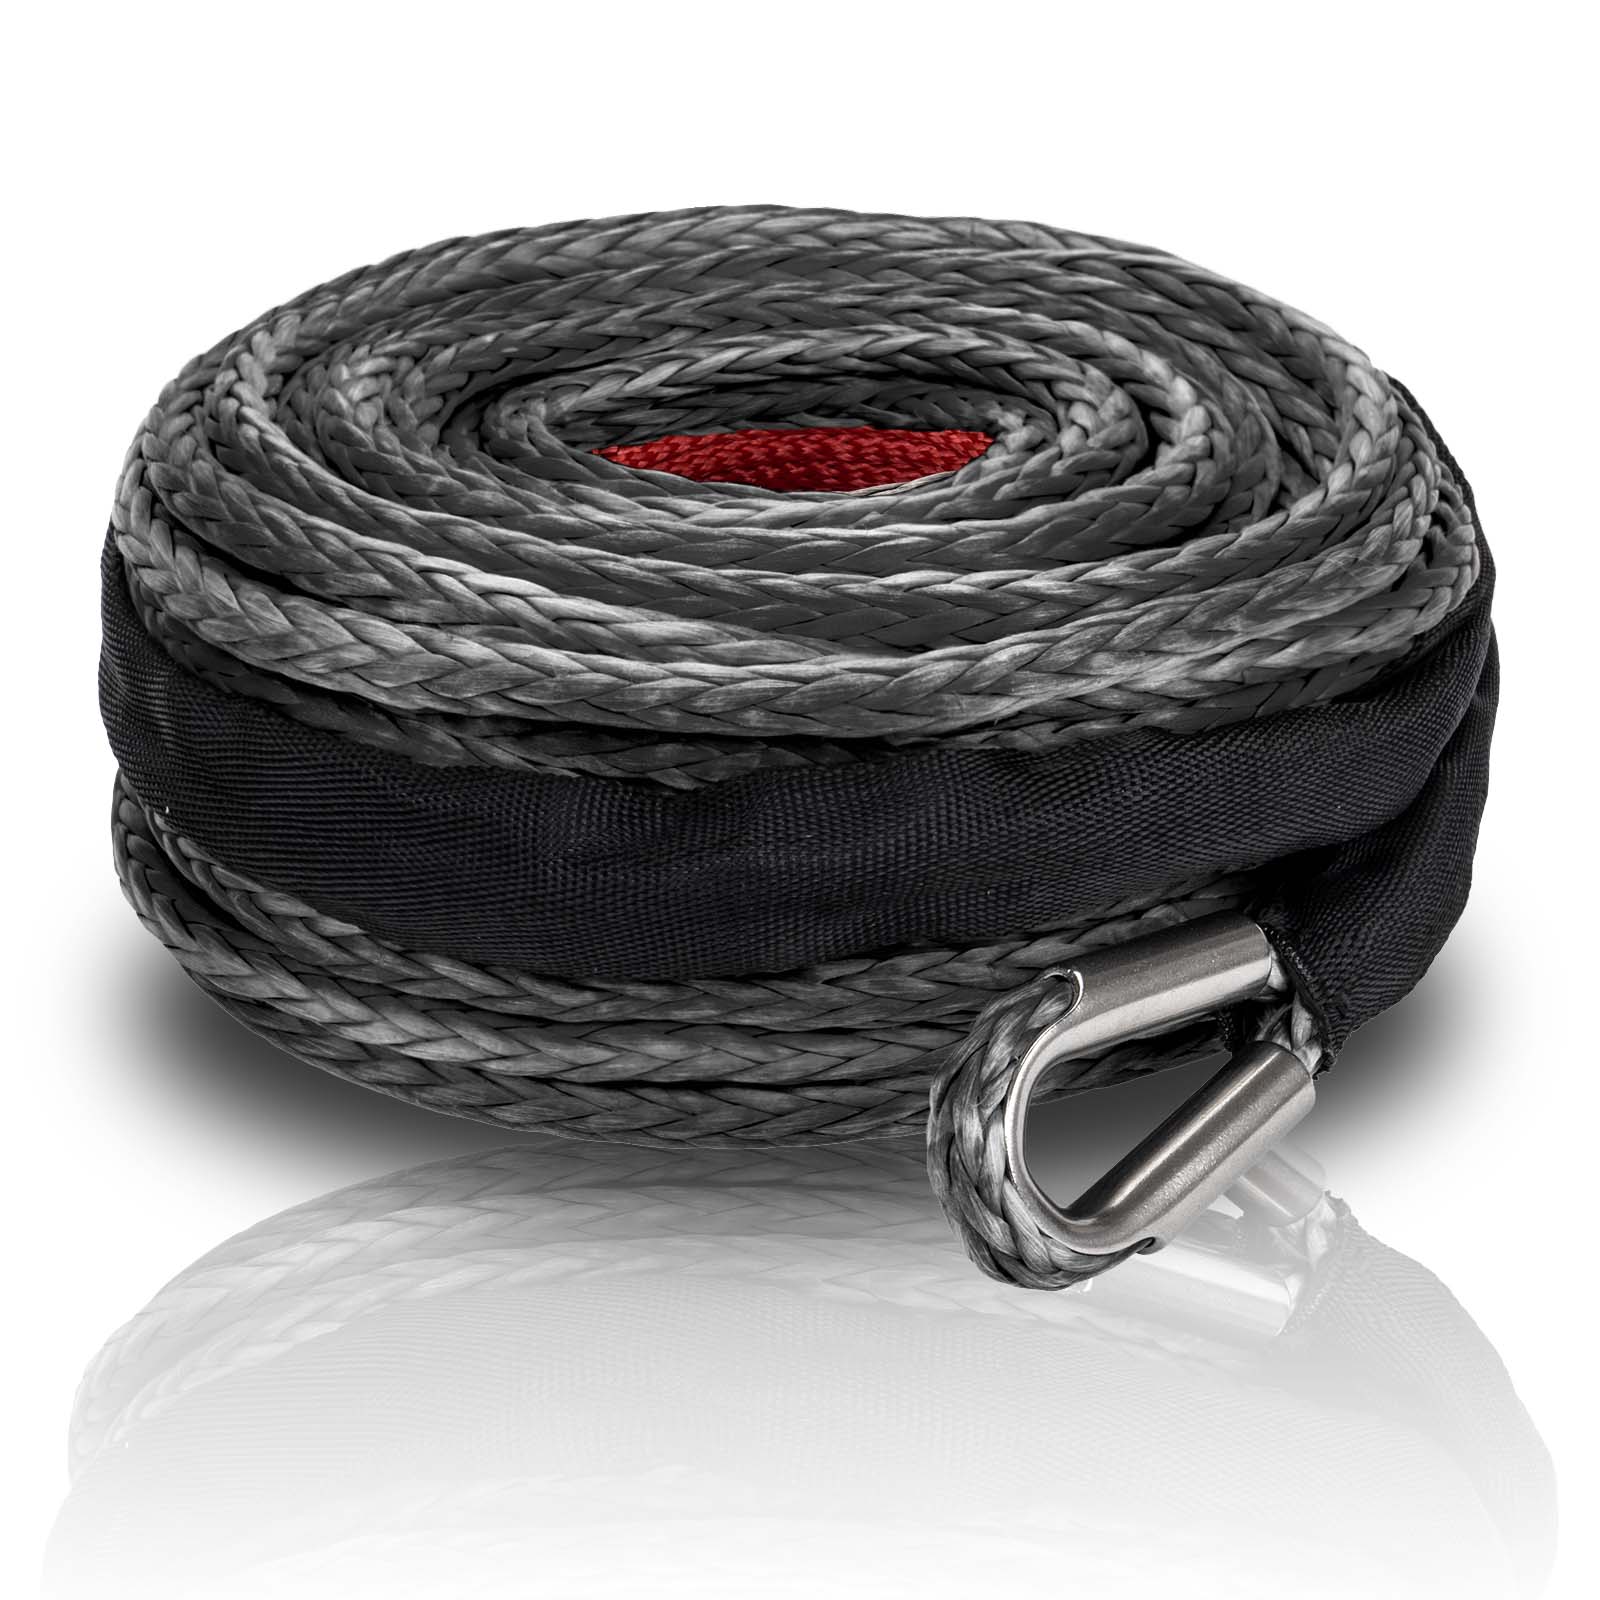 Openroad Synthetic Winch Rope, 3/8 x 85'-18000 lbs Winch Line Rope Replacement with Protective Sleeve/Rope Winch Hook, Gray